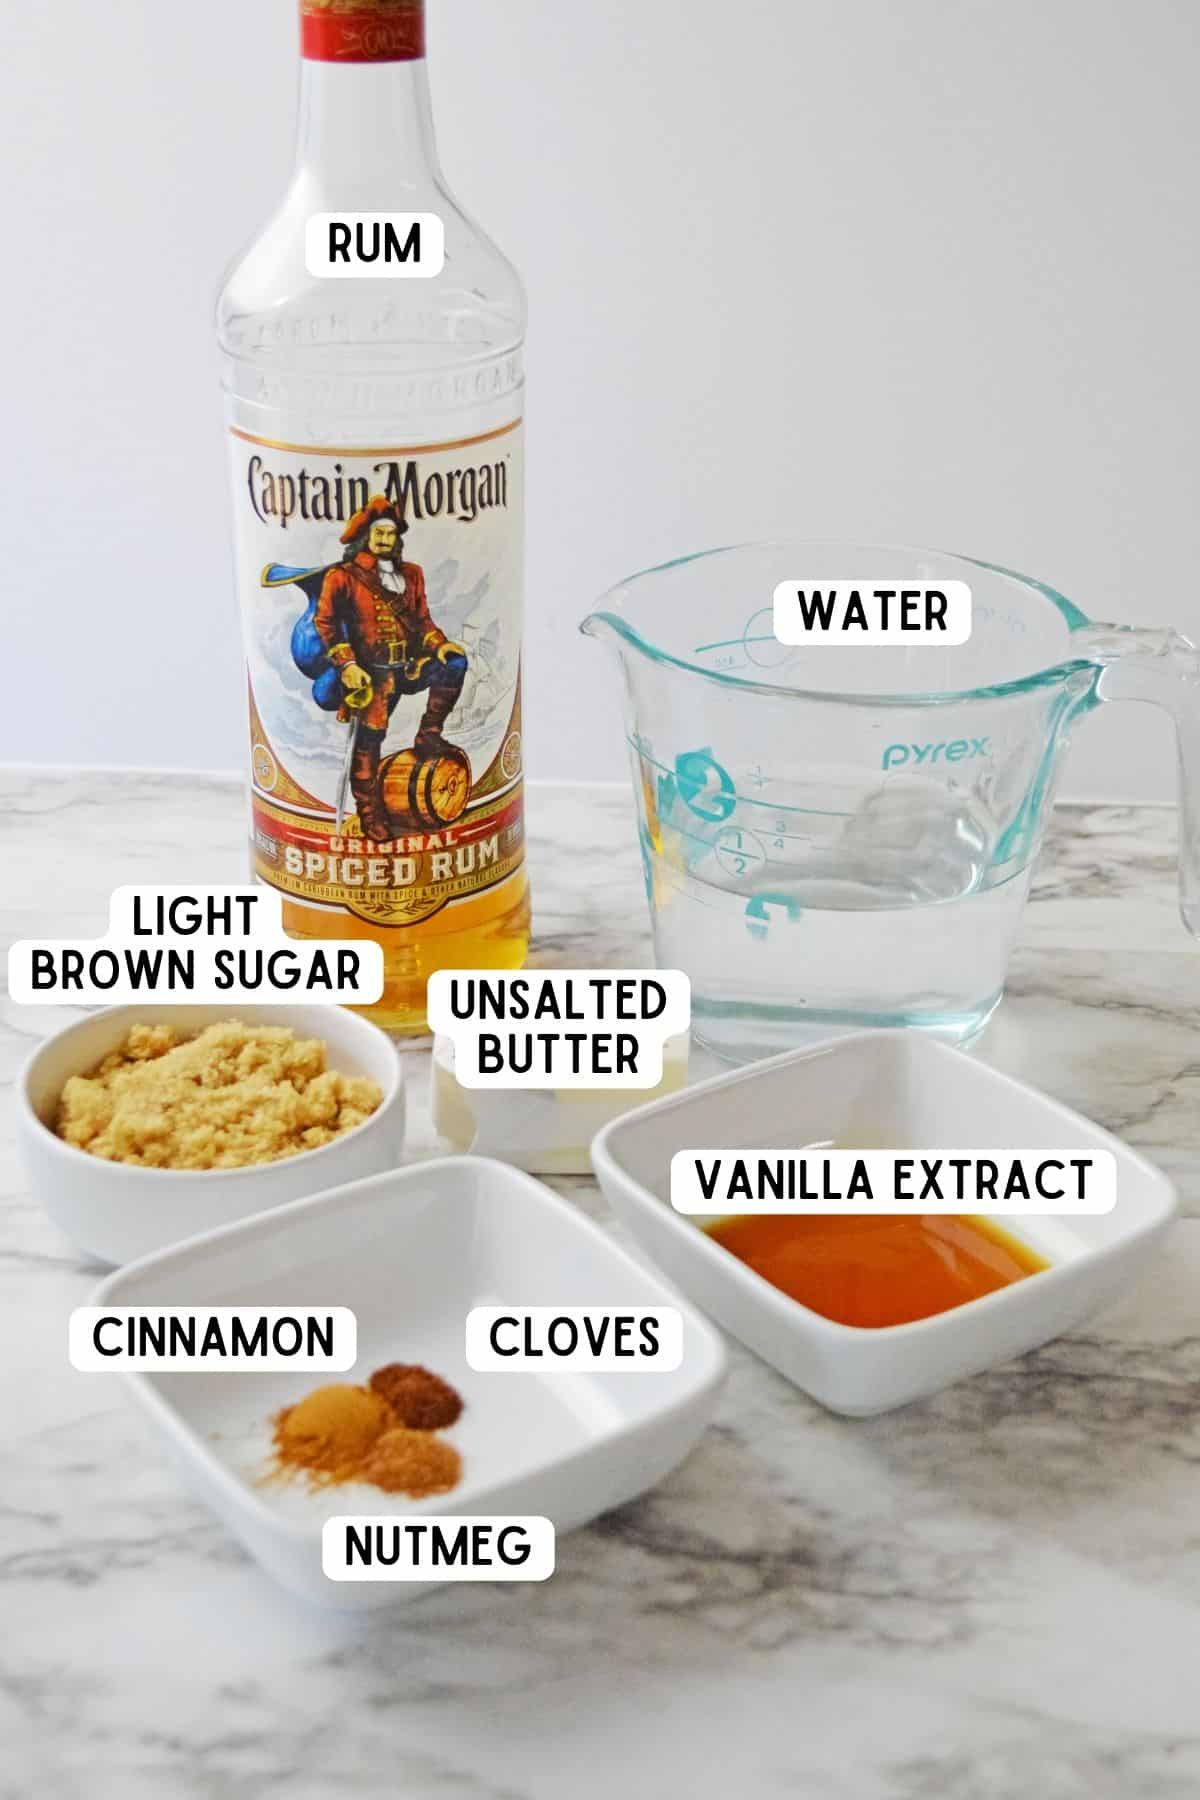 Ingredients for Hot Buttered Rum recipe: bottle of spiced rum, light brown sugar, water, vanilla extract, unsalted butter, cinnamon, cloves, and nutmeg.